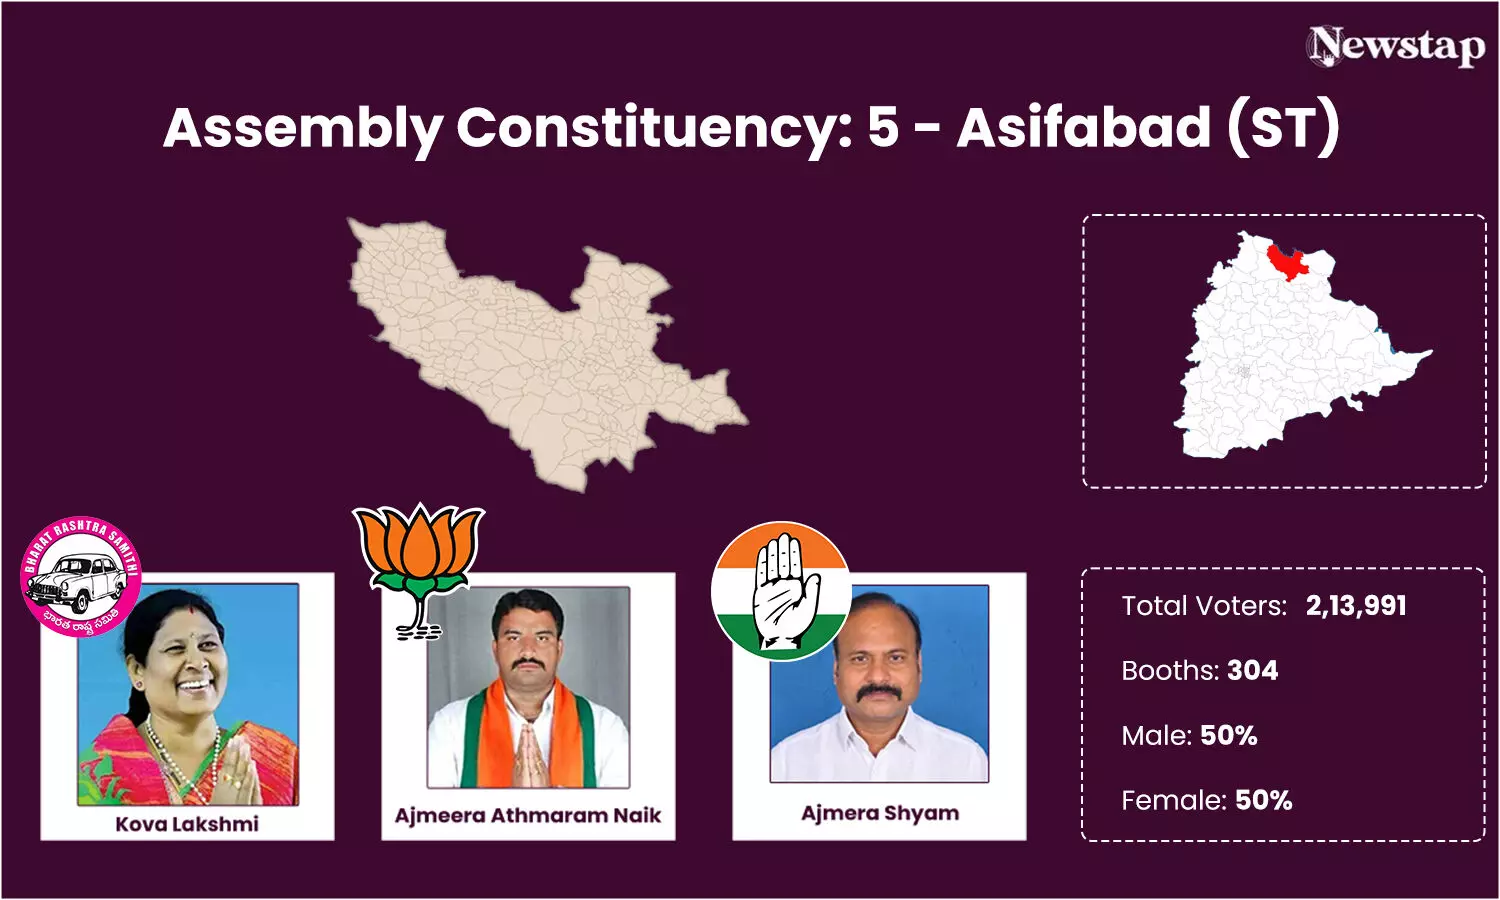 Podu lands, tribal non tribal issues dominate in Asifabad, Kova Lakshmi trying to regain lost ground